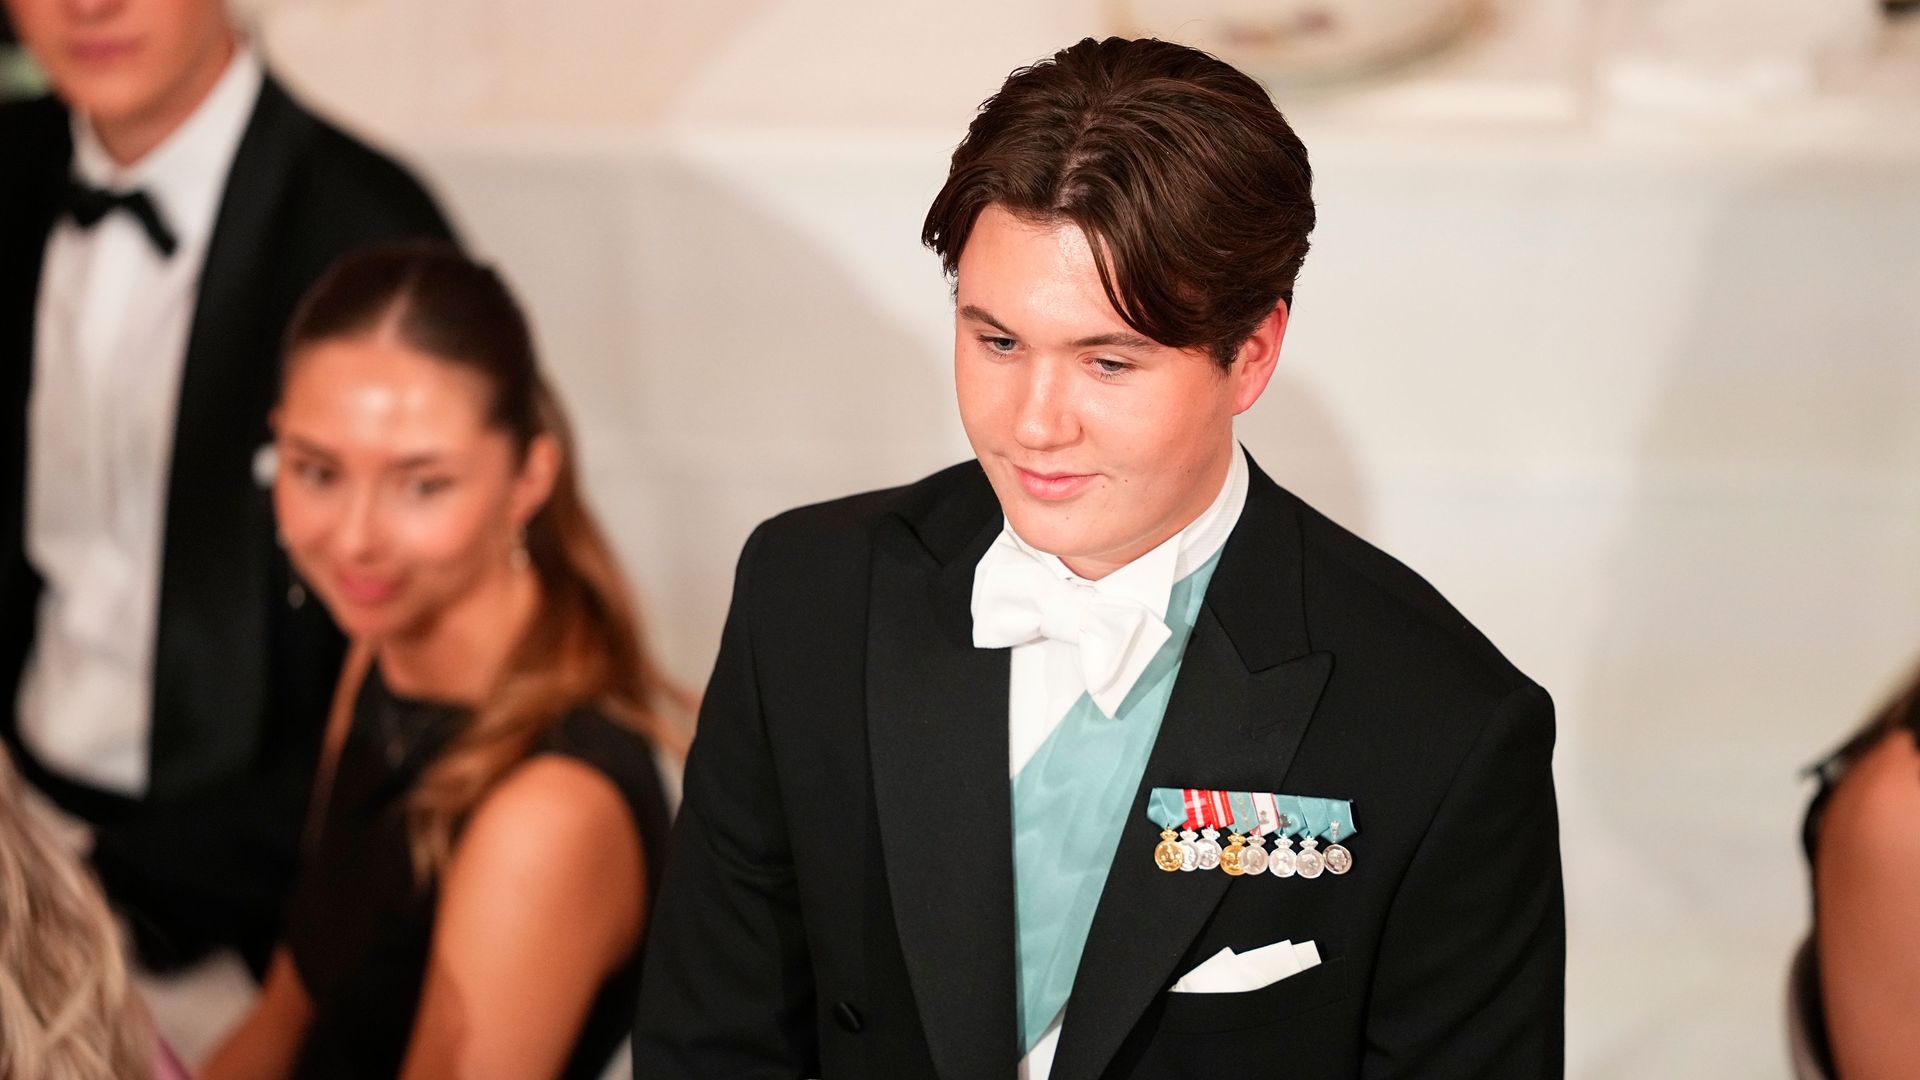 Prince Christian gives a speech at 18th birthday dinner